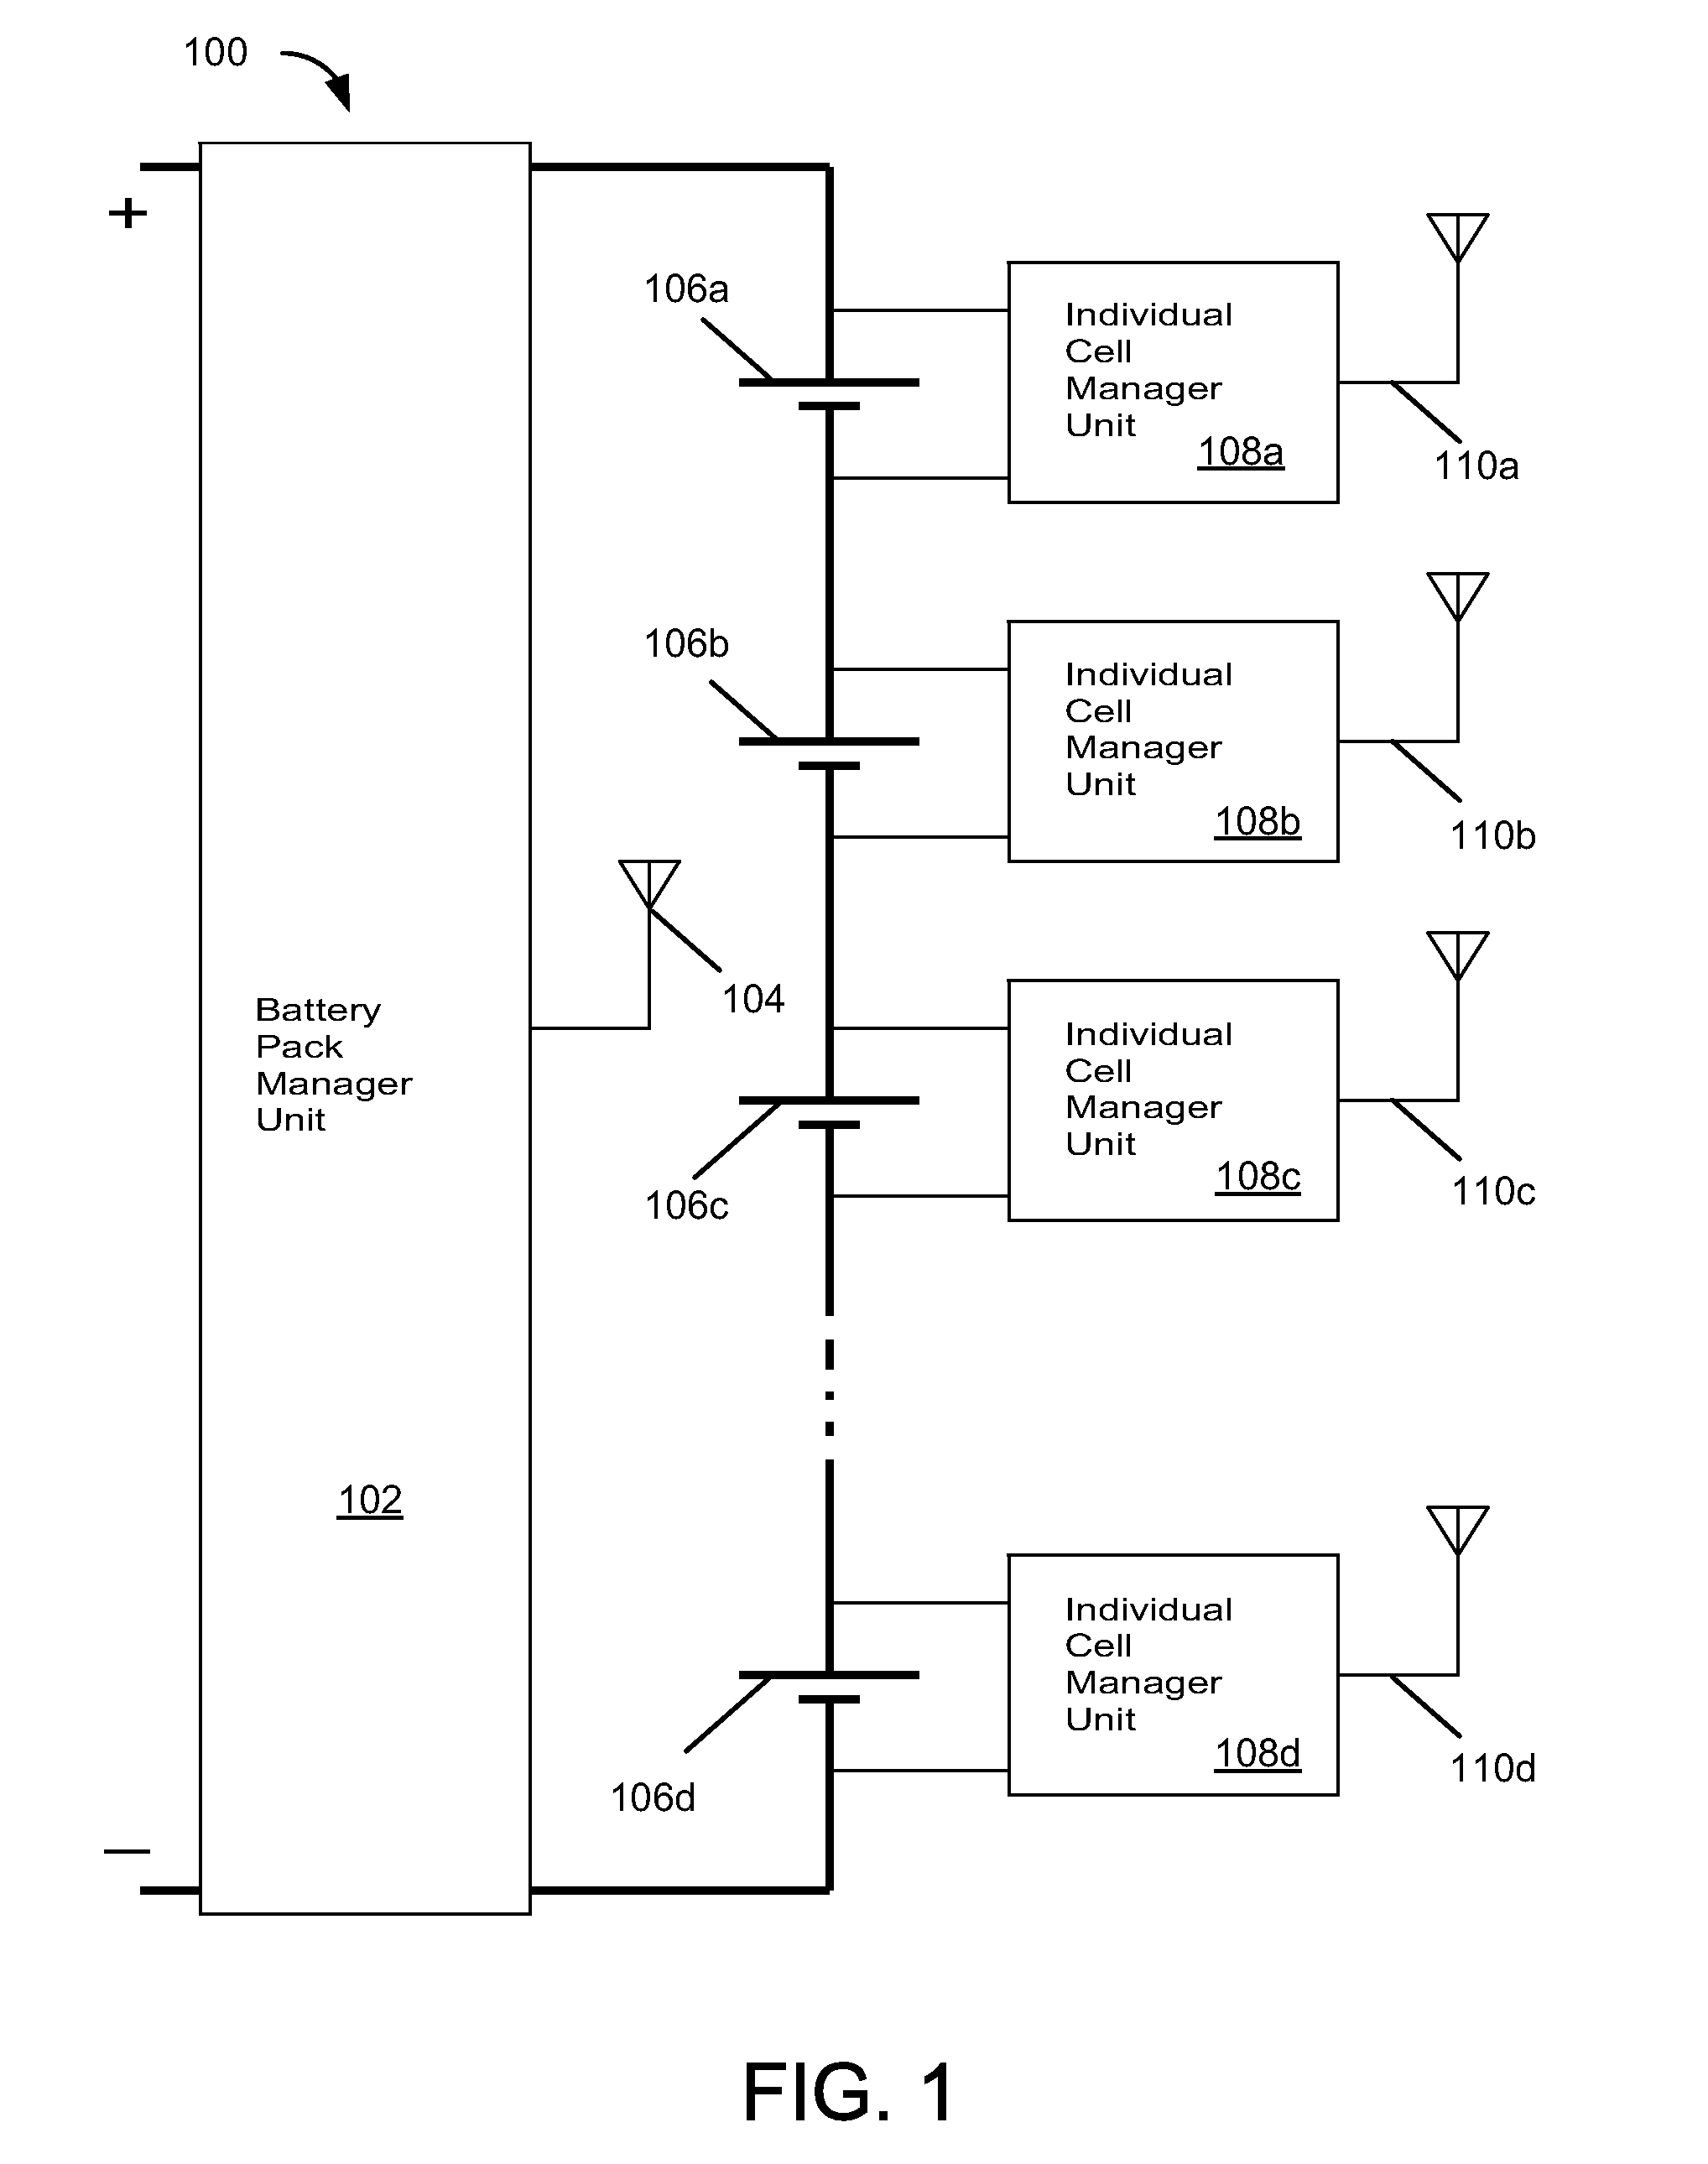 Battery pack manager unit and method for using same to extend the life of a battery pack